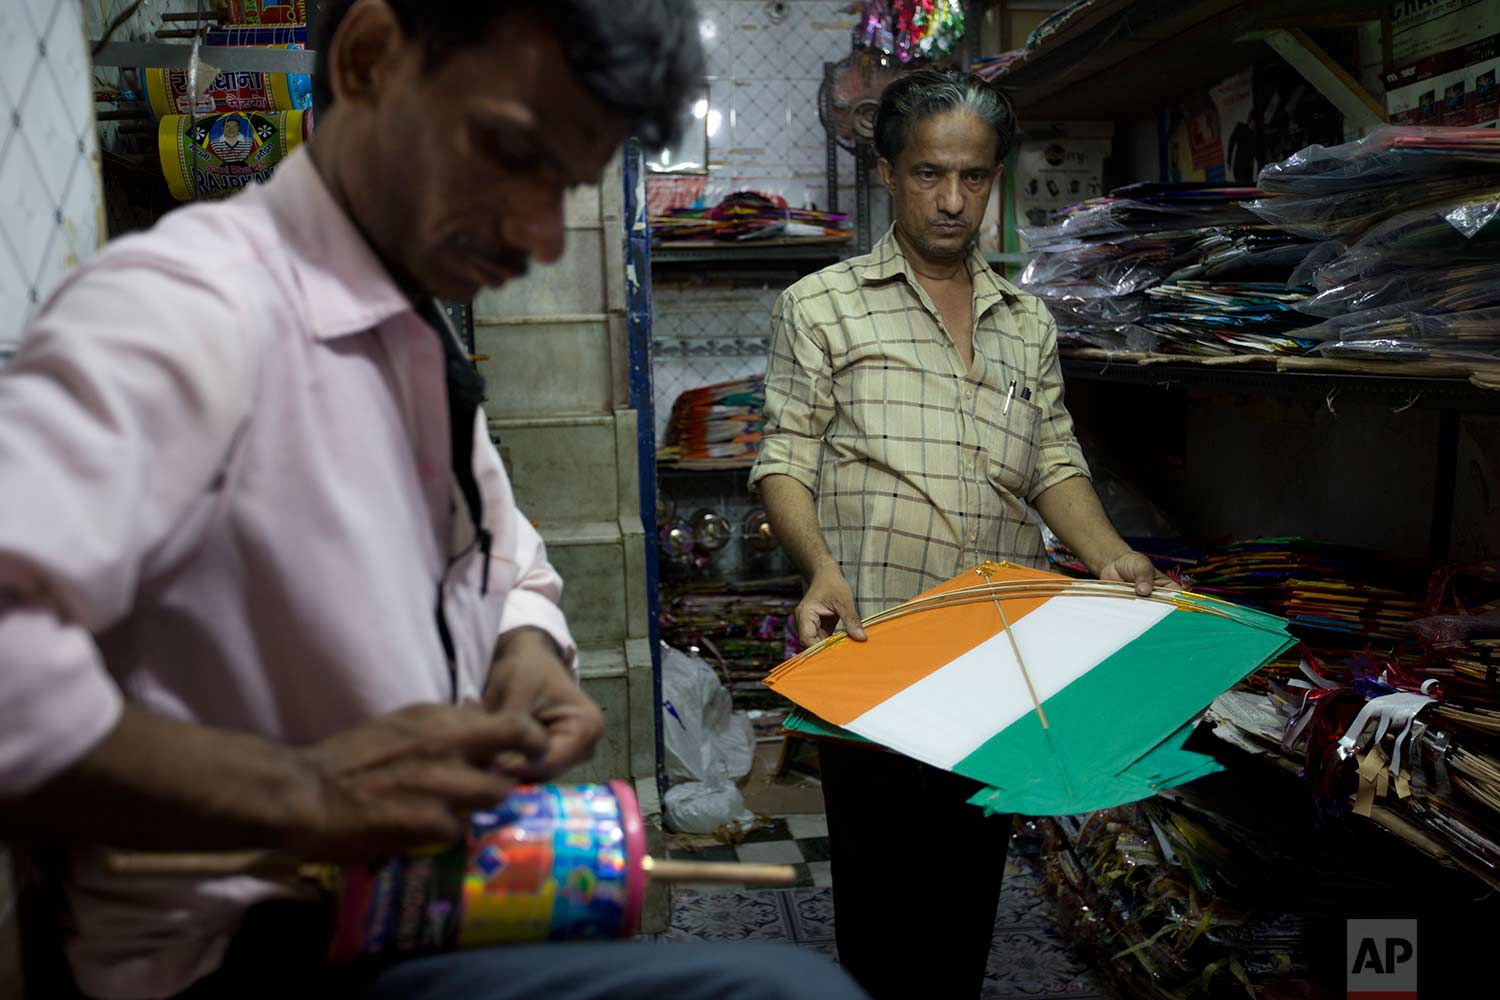  In this Tuesday, Aug. 15, 2017 photo, a kite seller holds a kite to hand over to a customer on Independence Day in the old quarters of New Delhi, India. (AP Photo/Tsering Topgyal) 